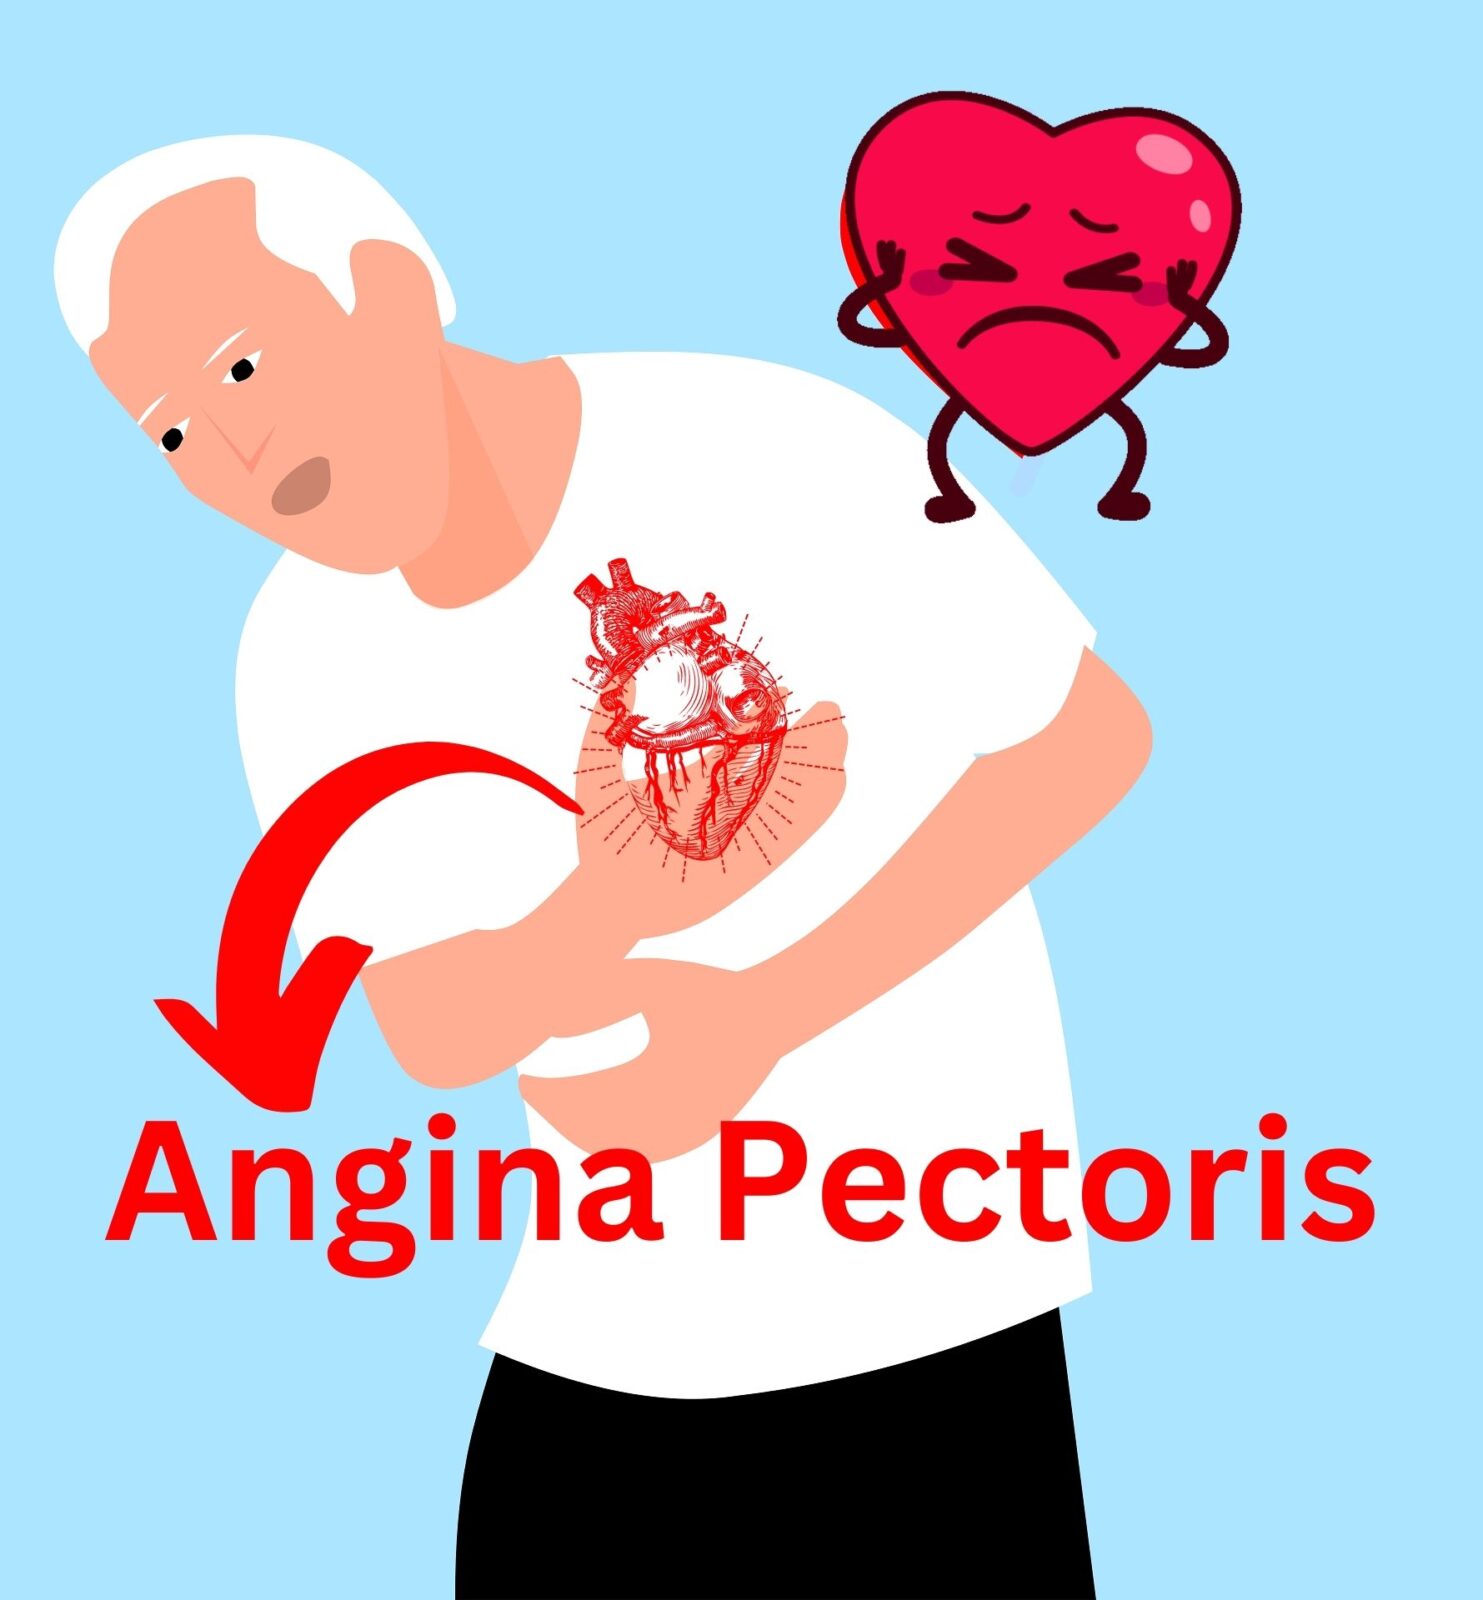 Angina Pectoris: About, Causes, Symptoms, Types, Test and Treatment.